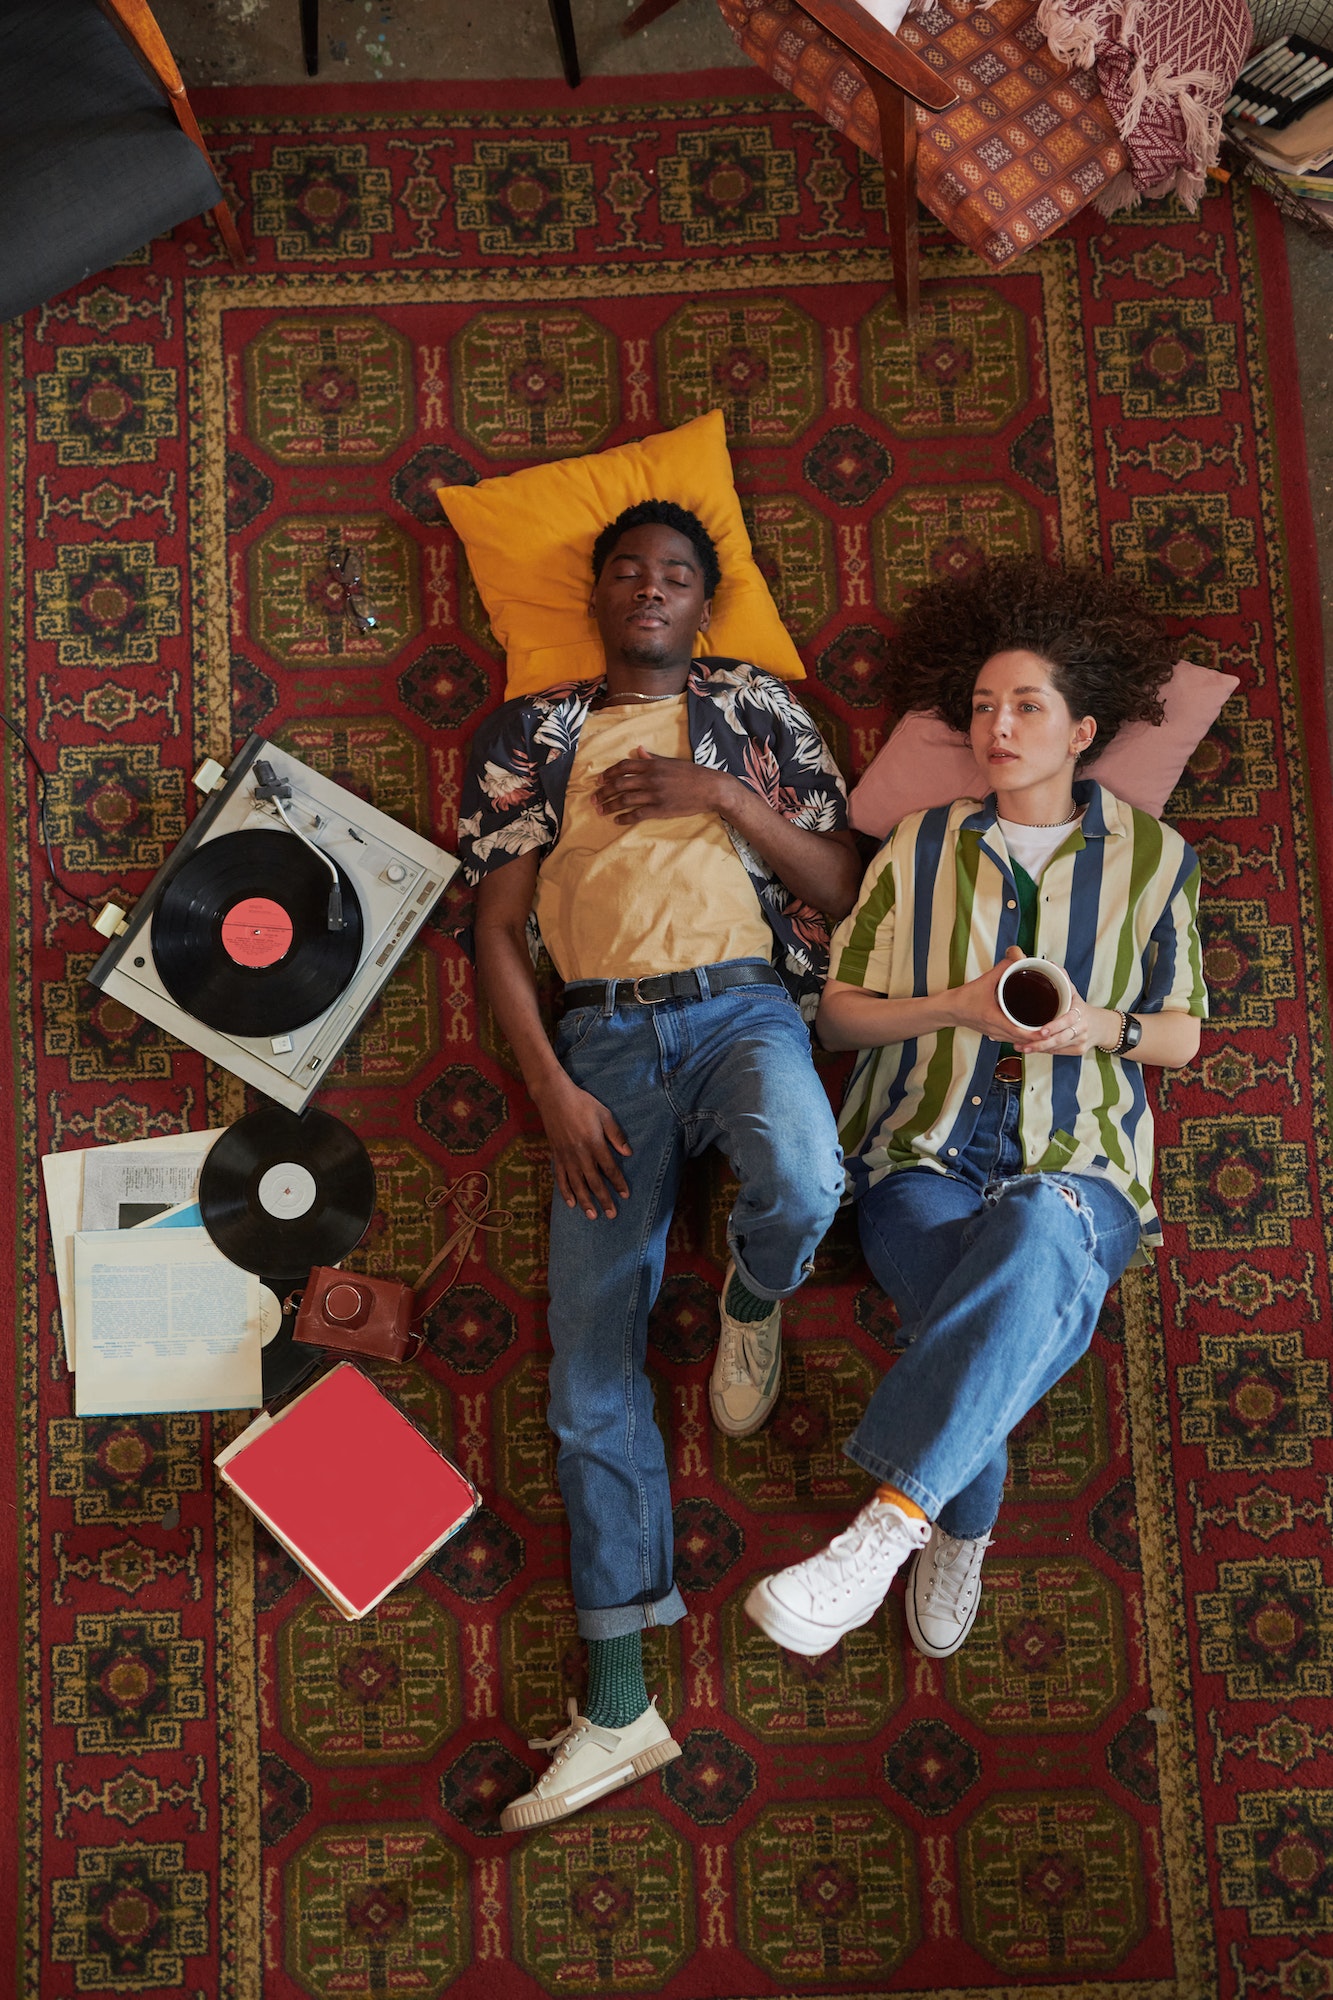 Young interracial dates keeping heads on pillows while relaxing on the floor